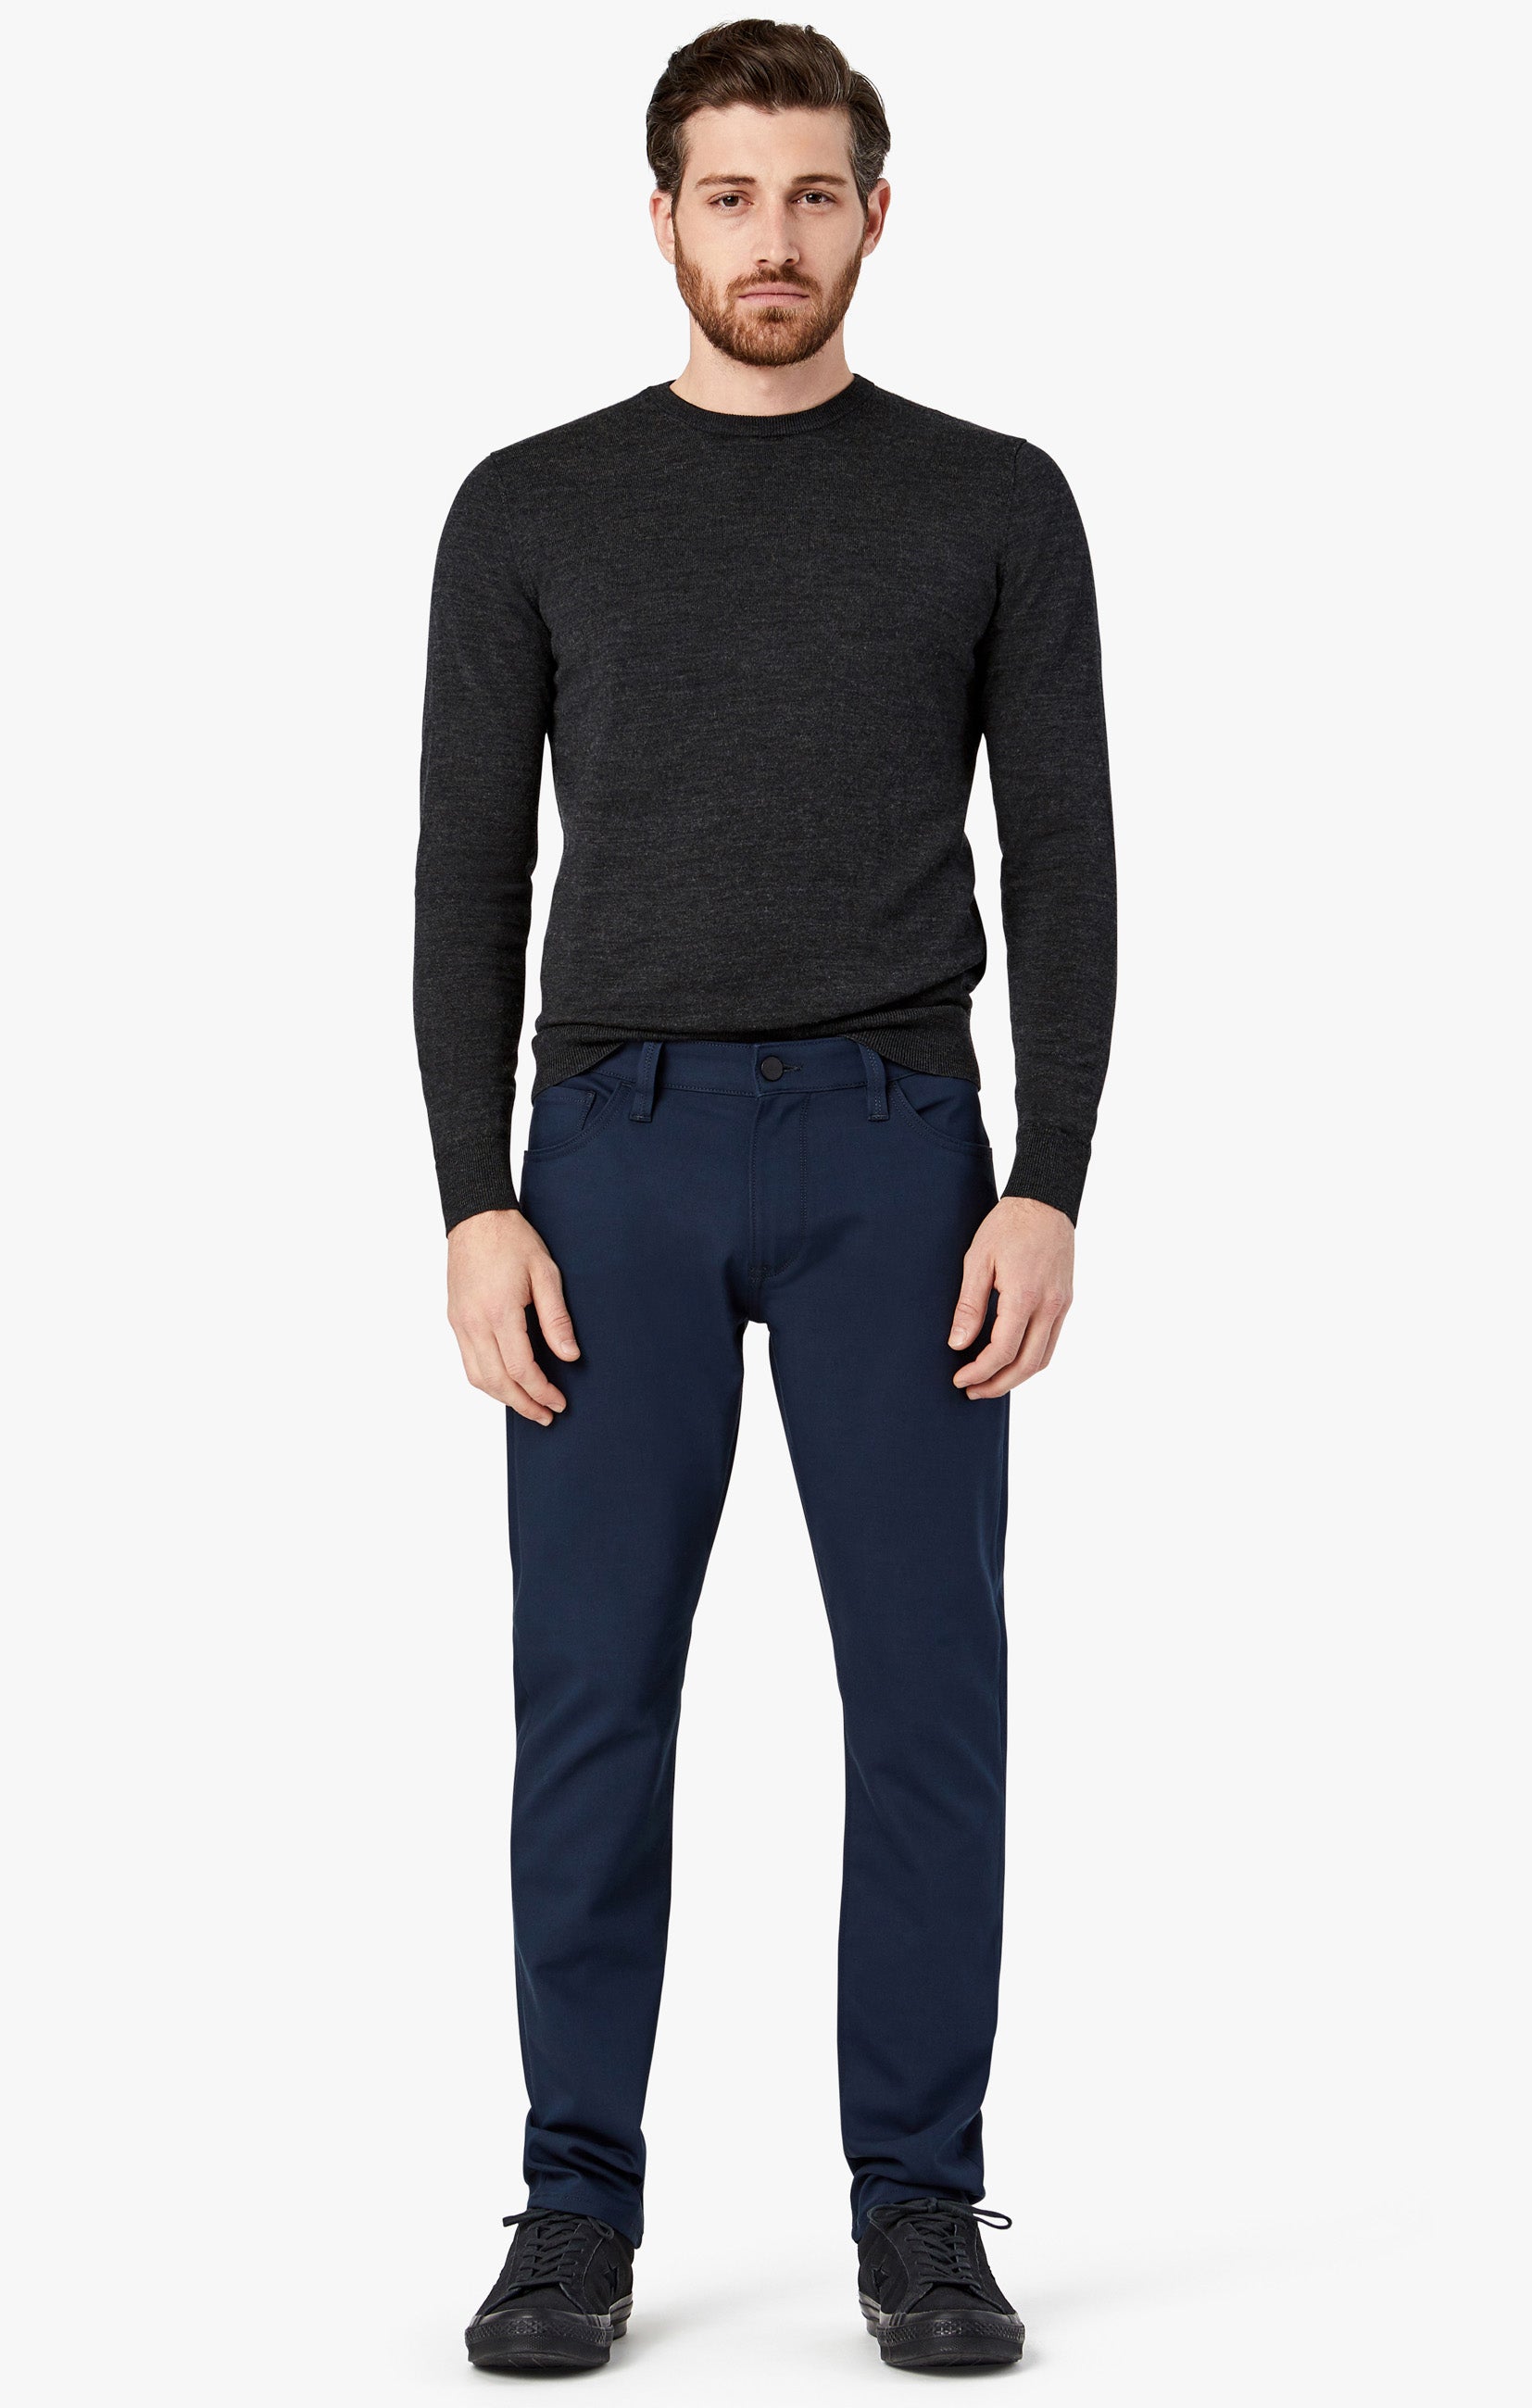 Courage Straight Leg Pants in Navy Commuter Image 1